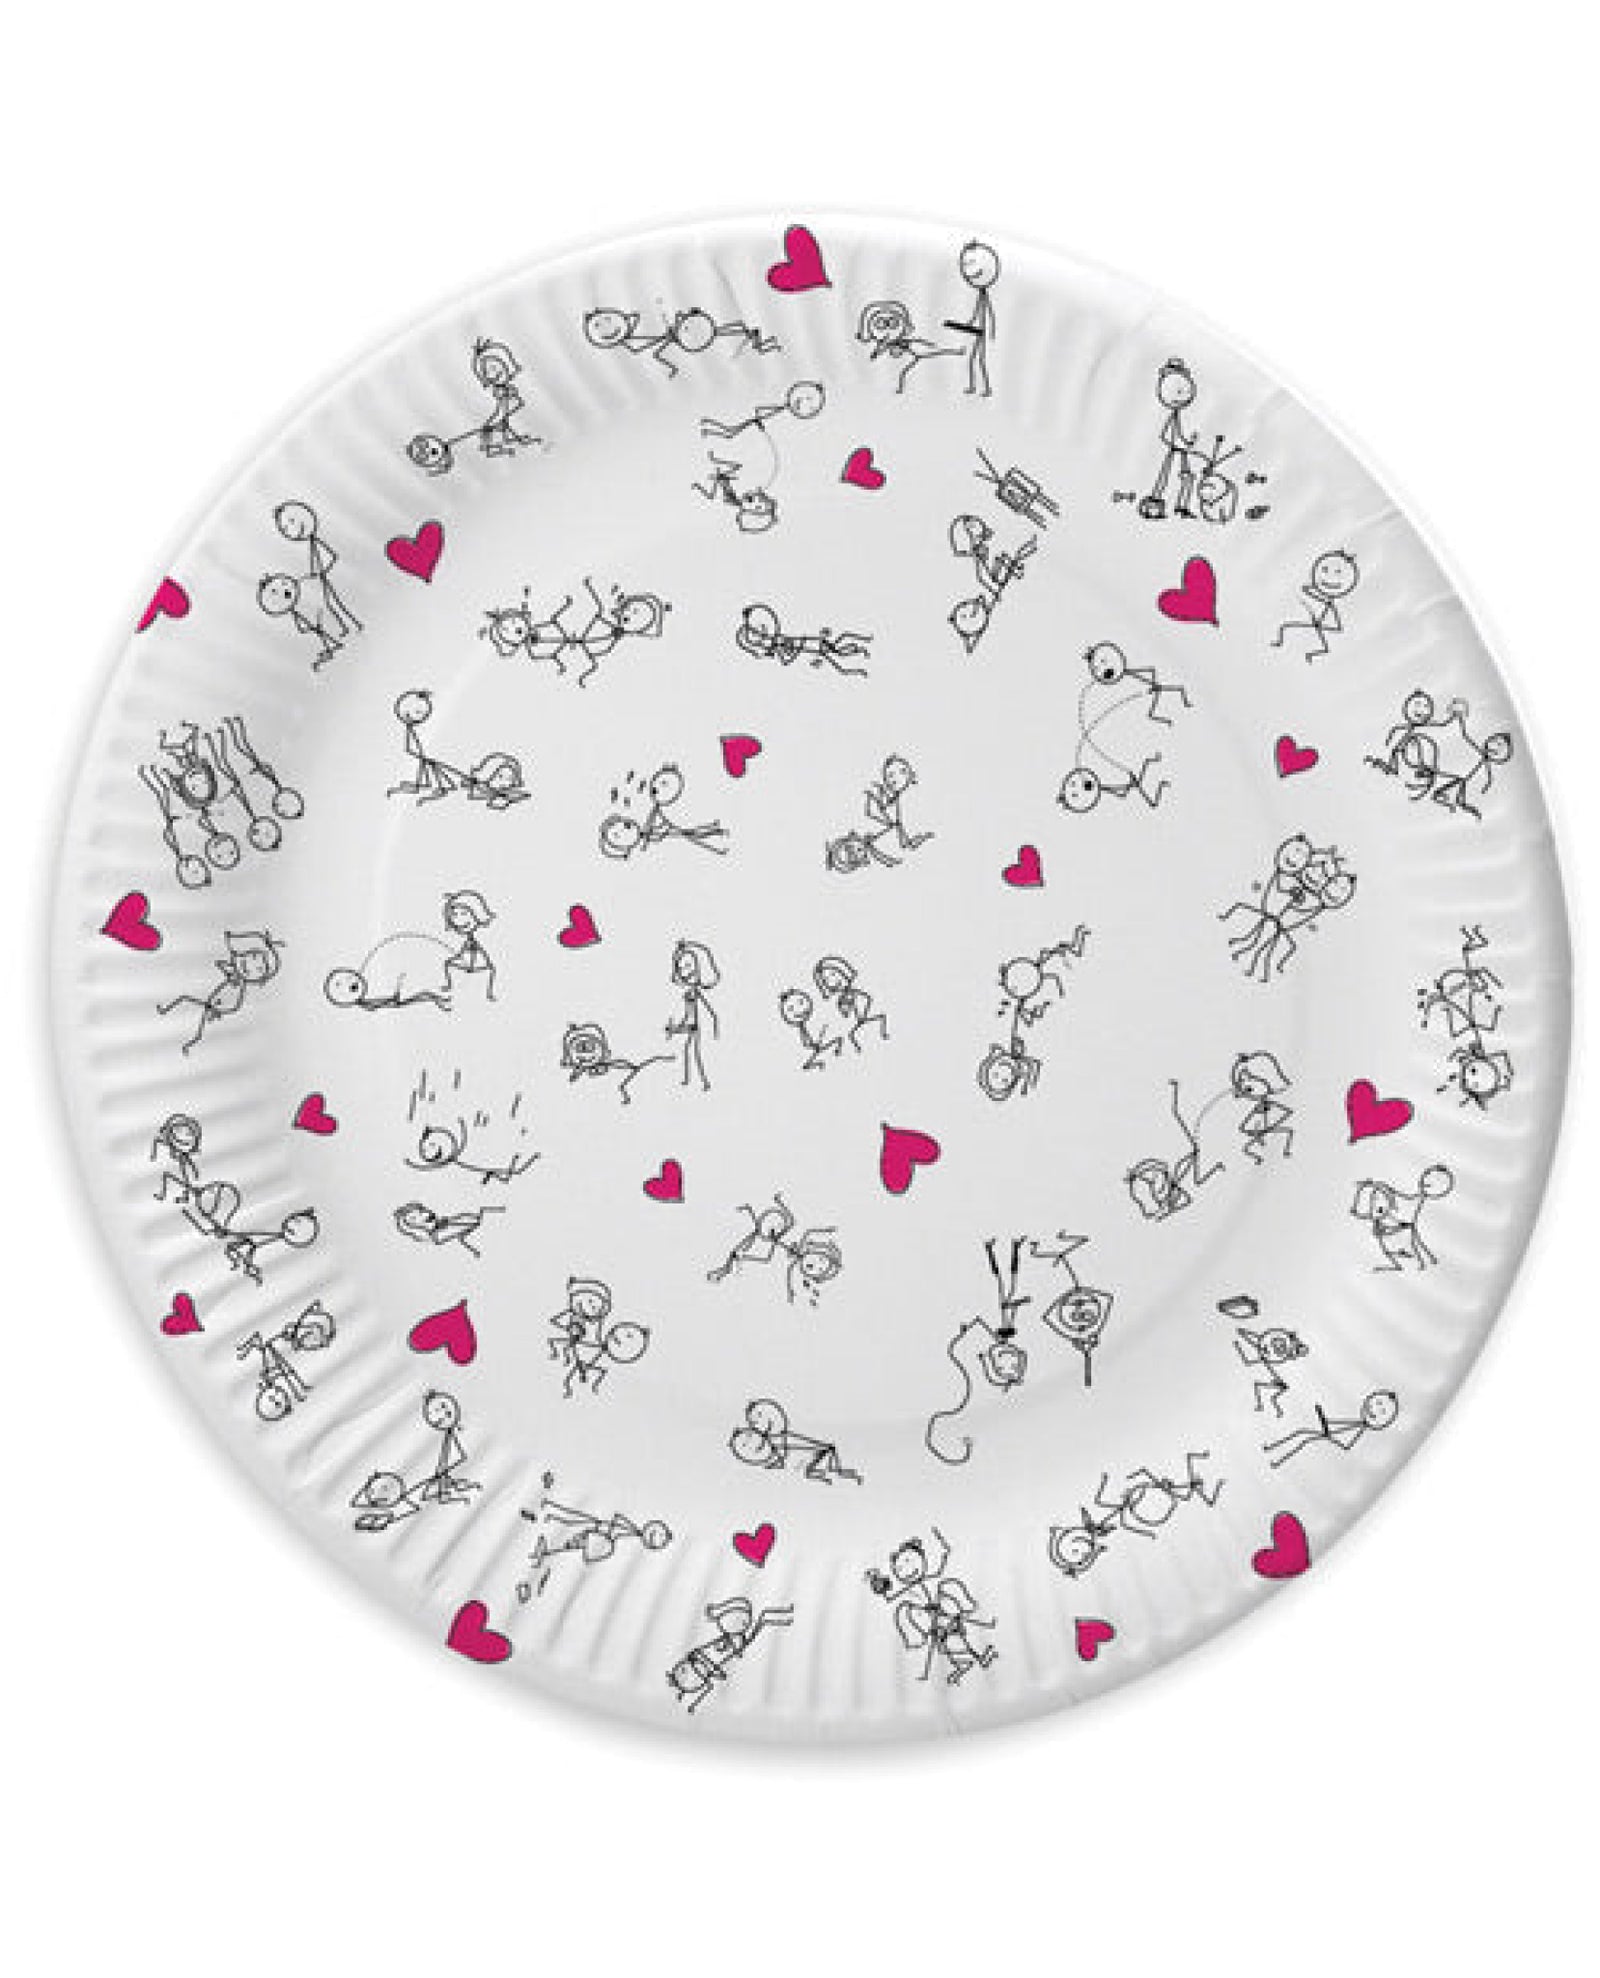 7" Dirty Dishes Position Plates - Bag Of 8 Little Genie